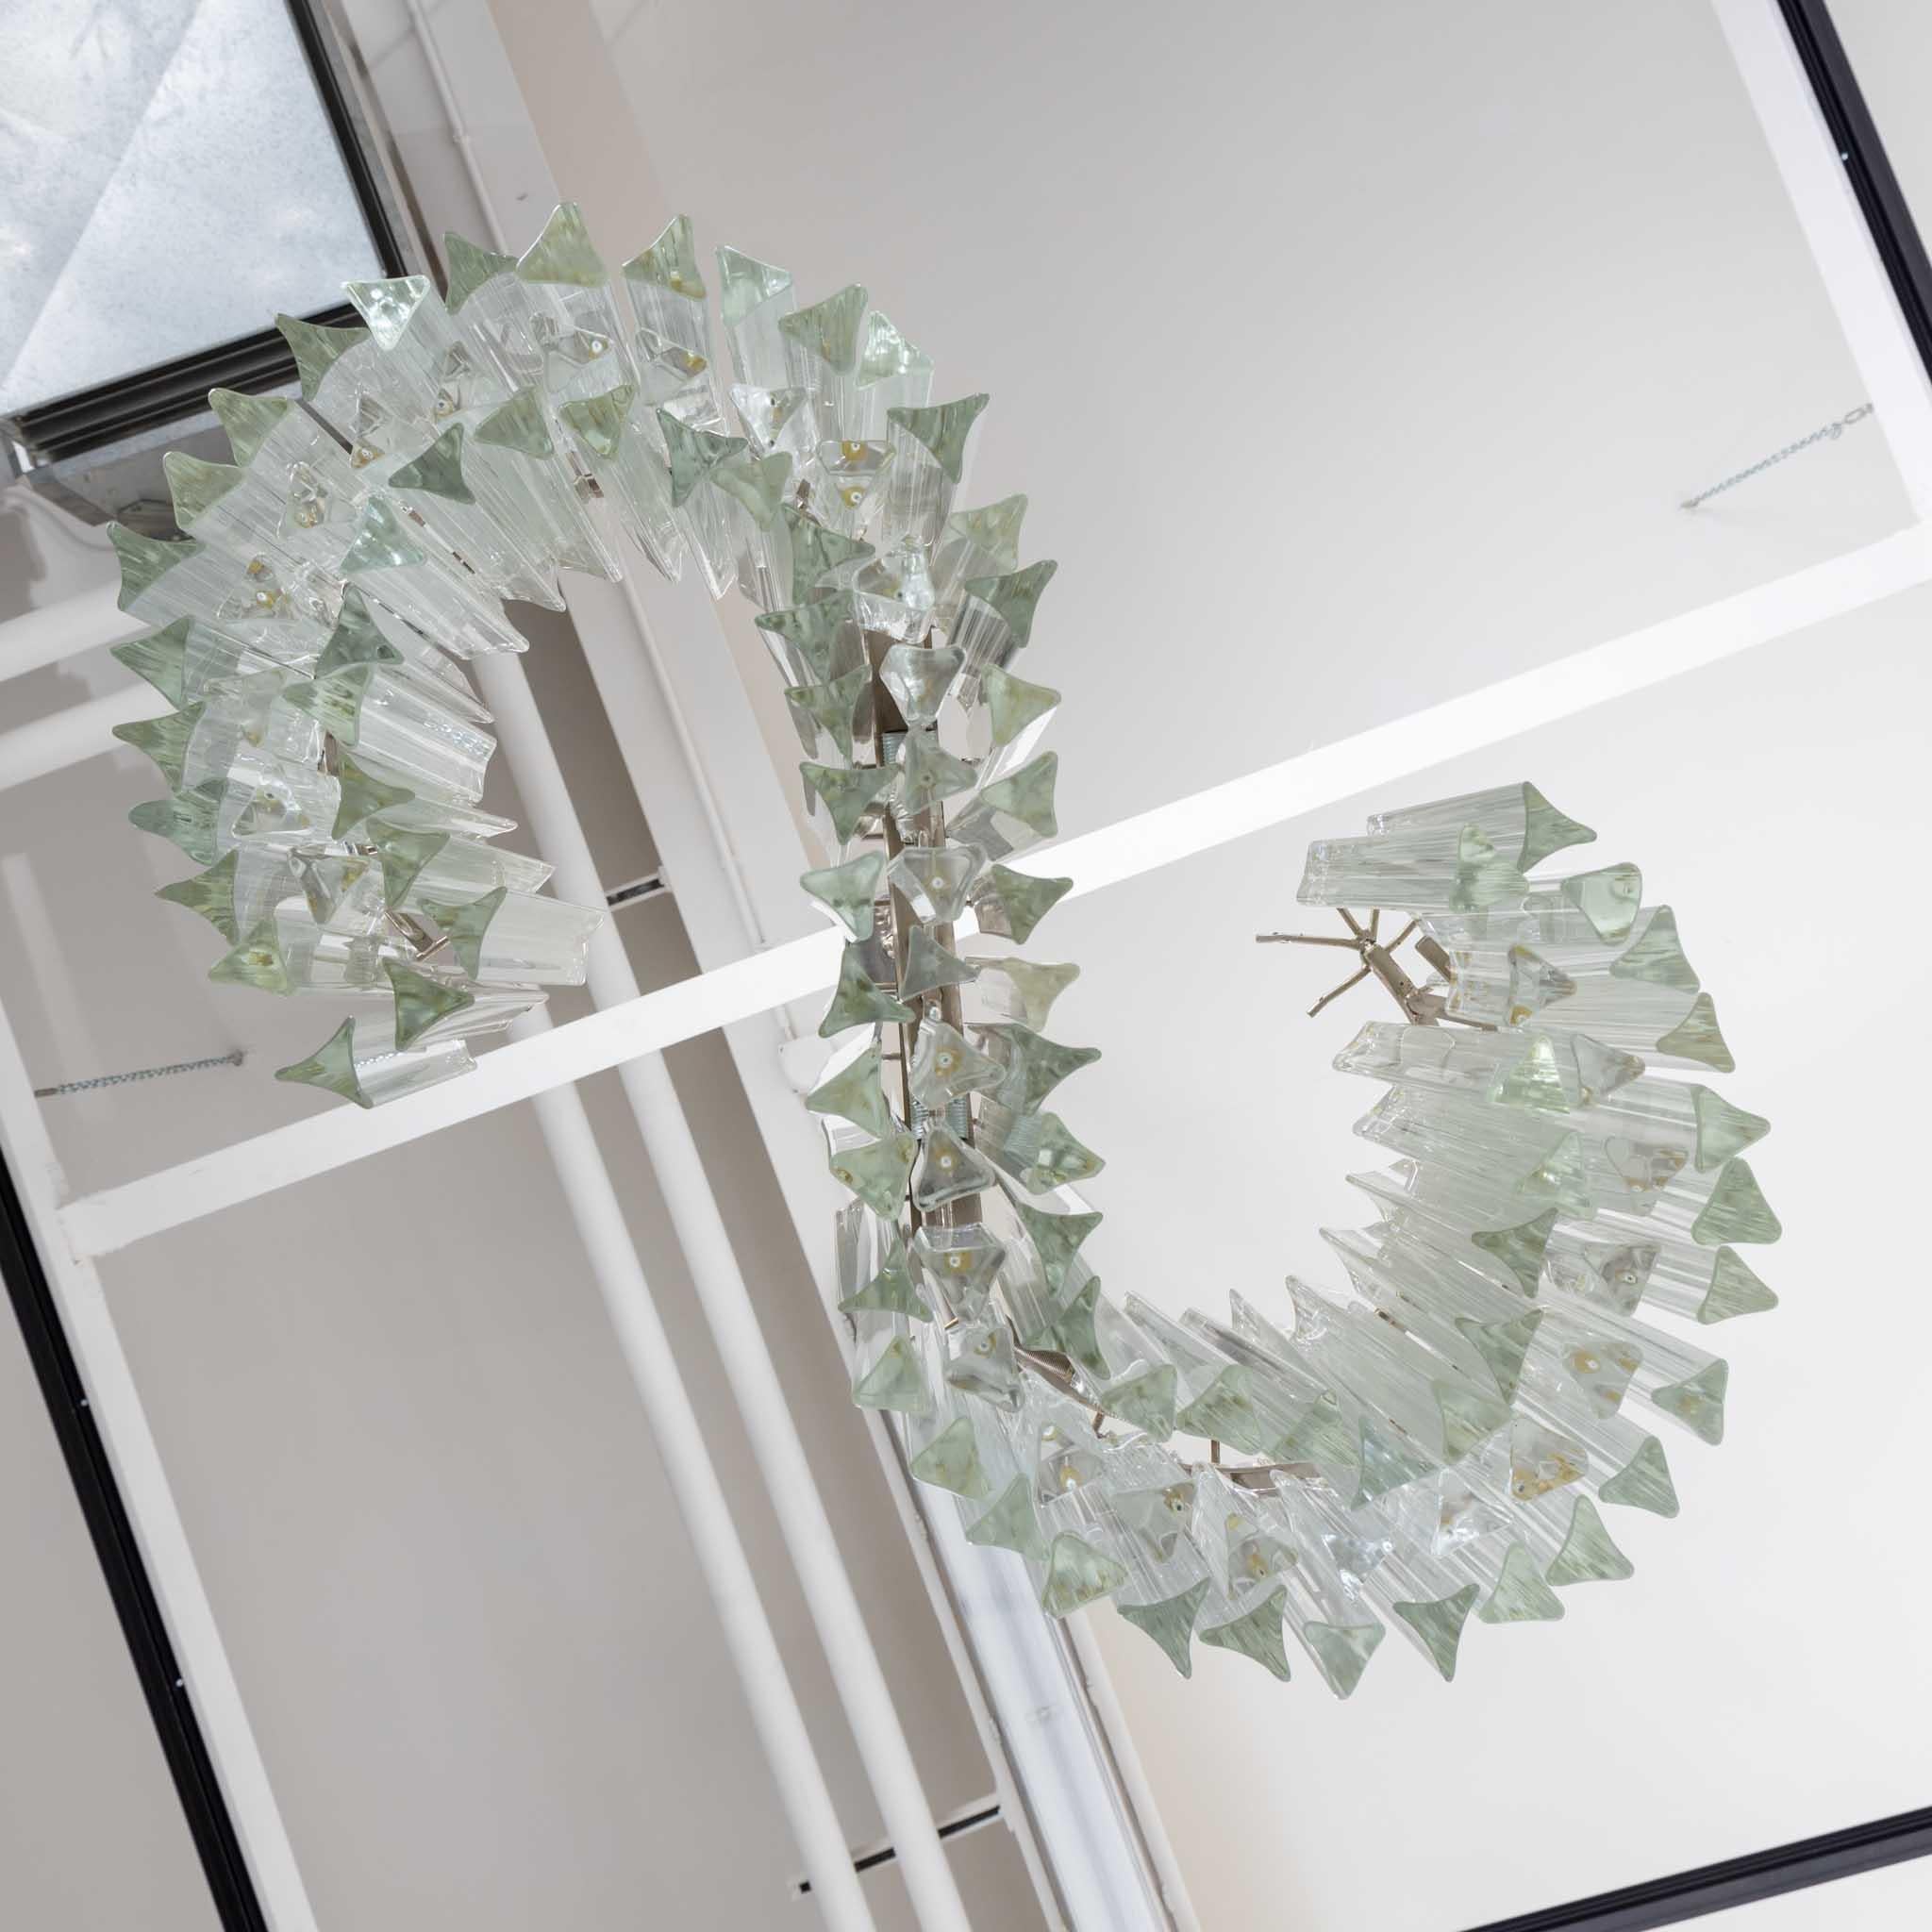 Venini chandelier with Triedri glass prisms of clear glass in beautiful S-shaped gradient.